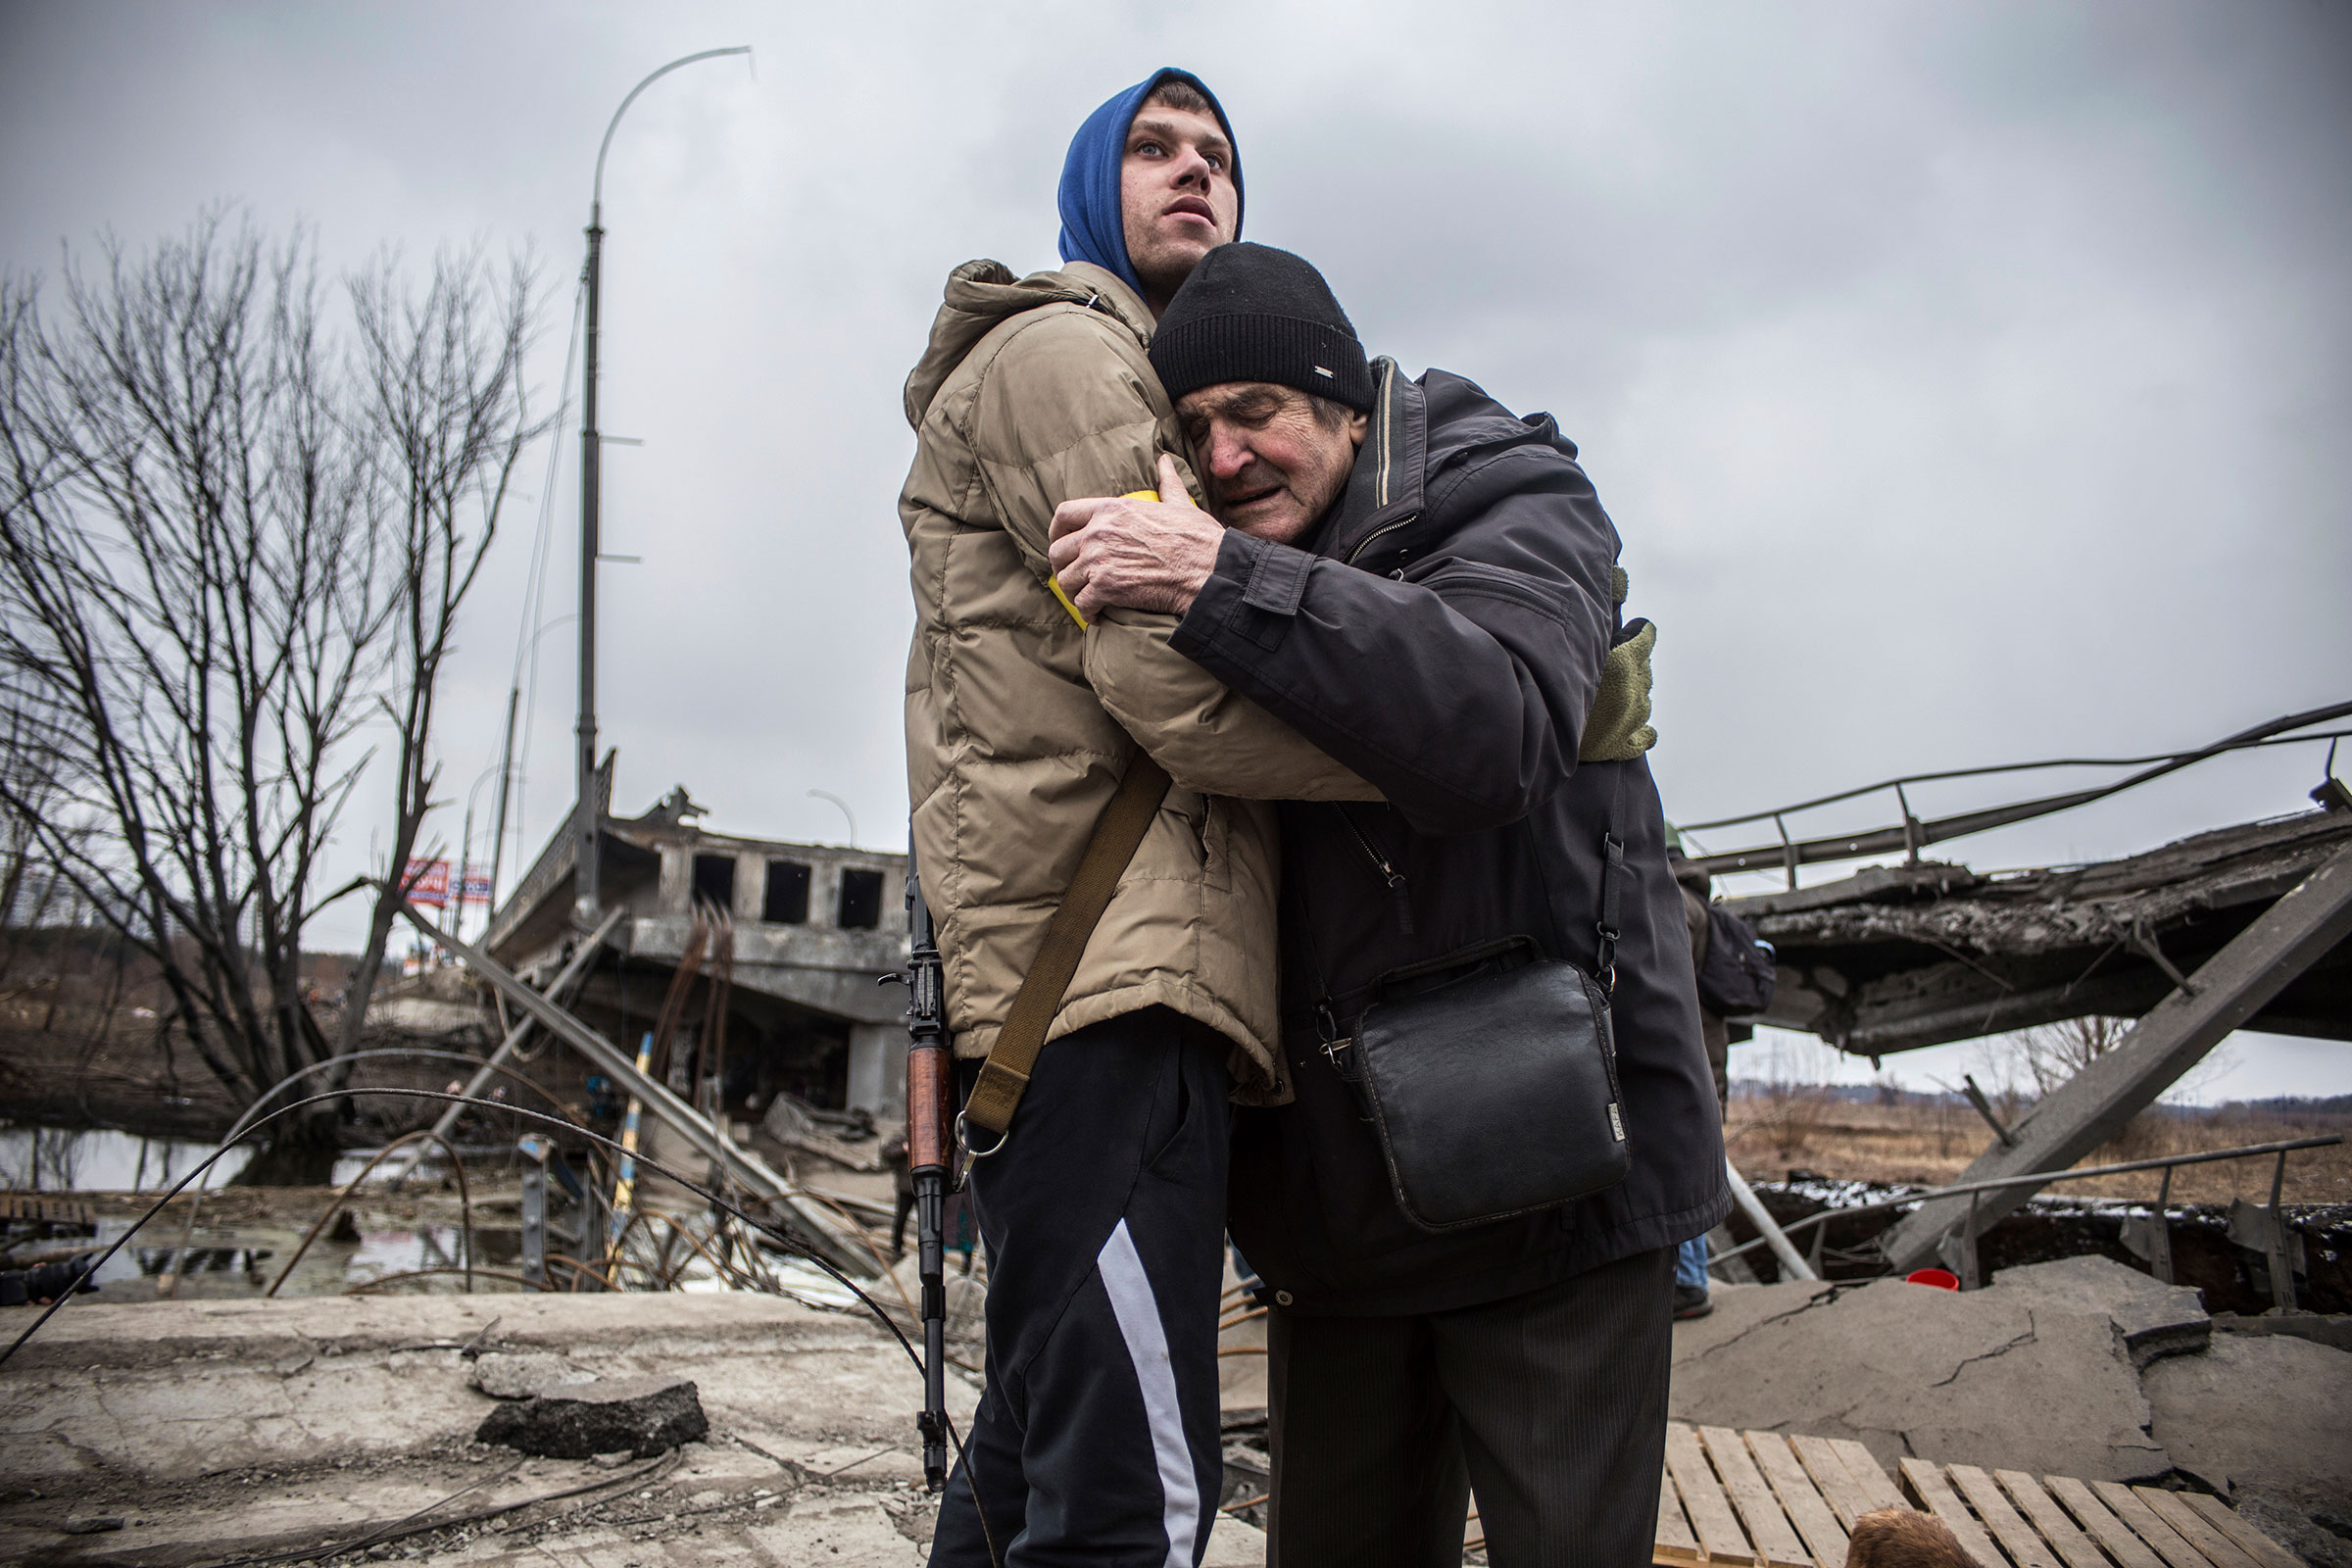 A Ukrainian Territorial Defense Forces member hugs a resident who leaves his home town following Russian artillery shelling in Irpin on March 9.